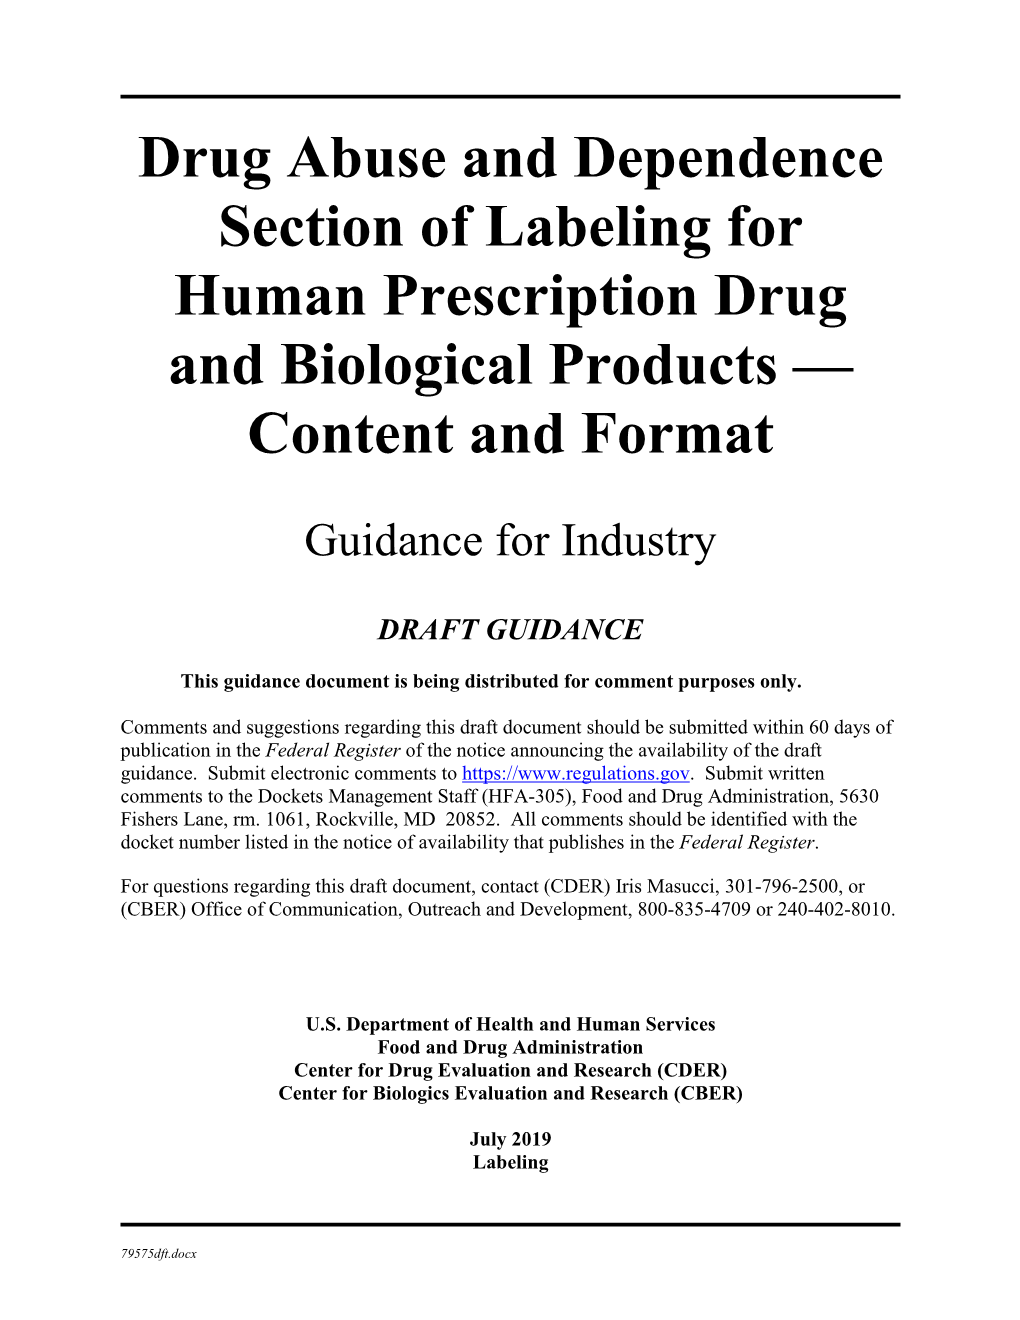 Drug Abuse and Dependence Section of Labeling for Human Prescription Drug and Biological Products — Content and Format